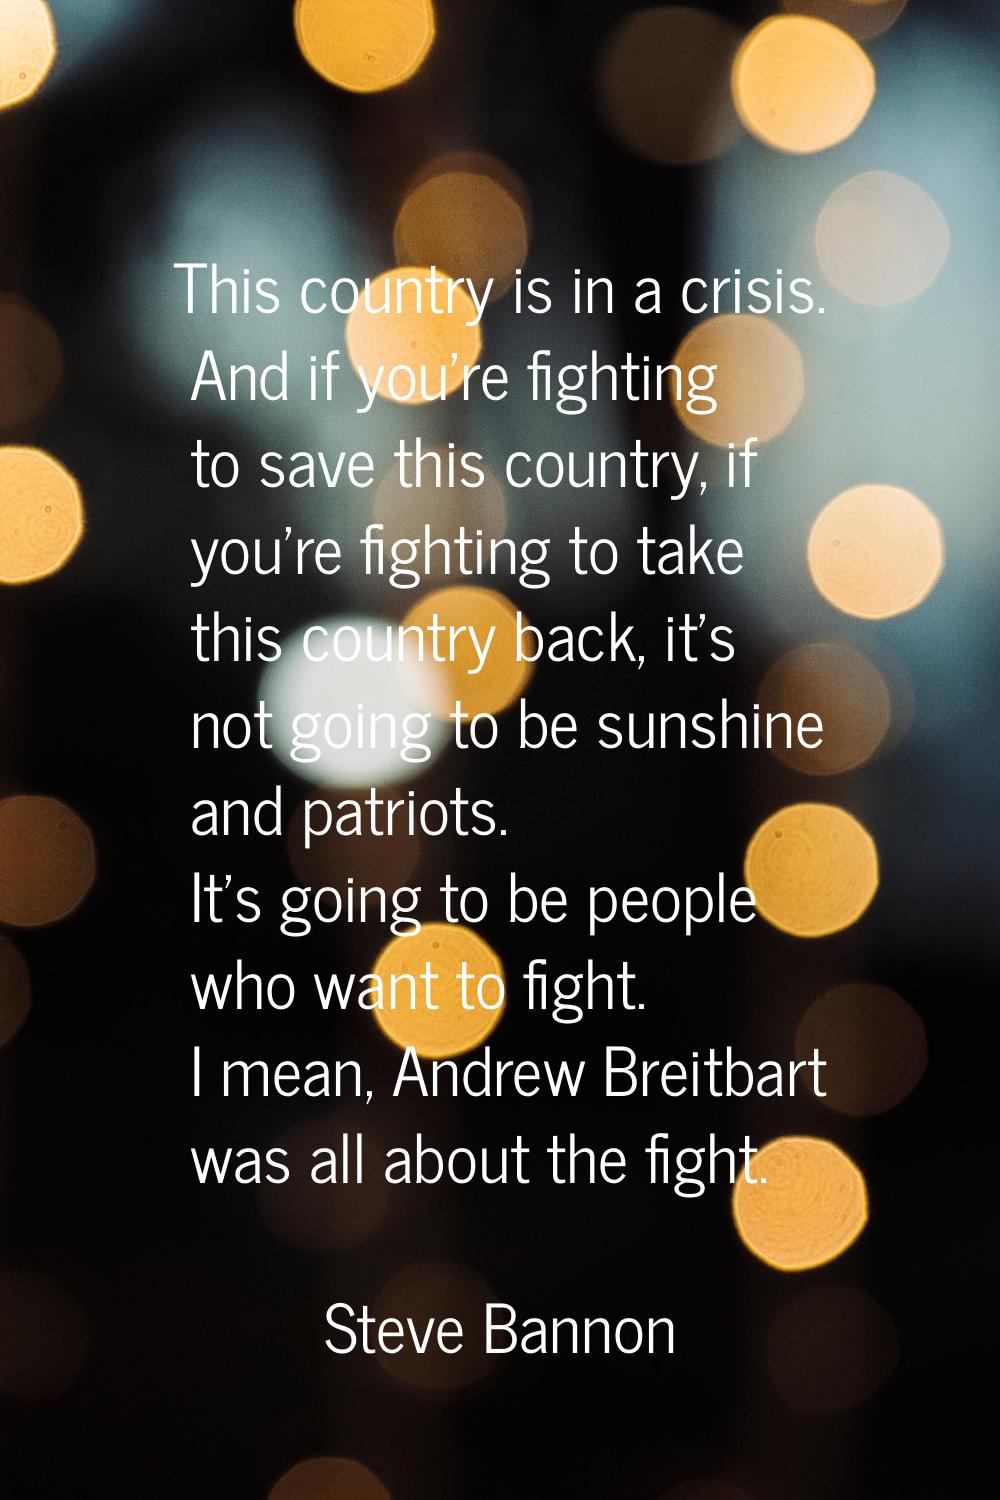 This country is in a crisis. And if you're fighting to save this country, if you're fighting to tak